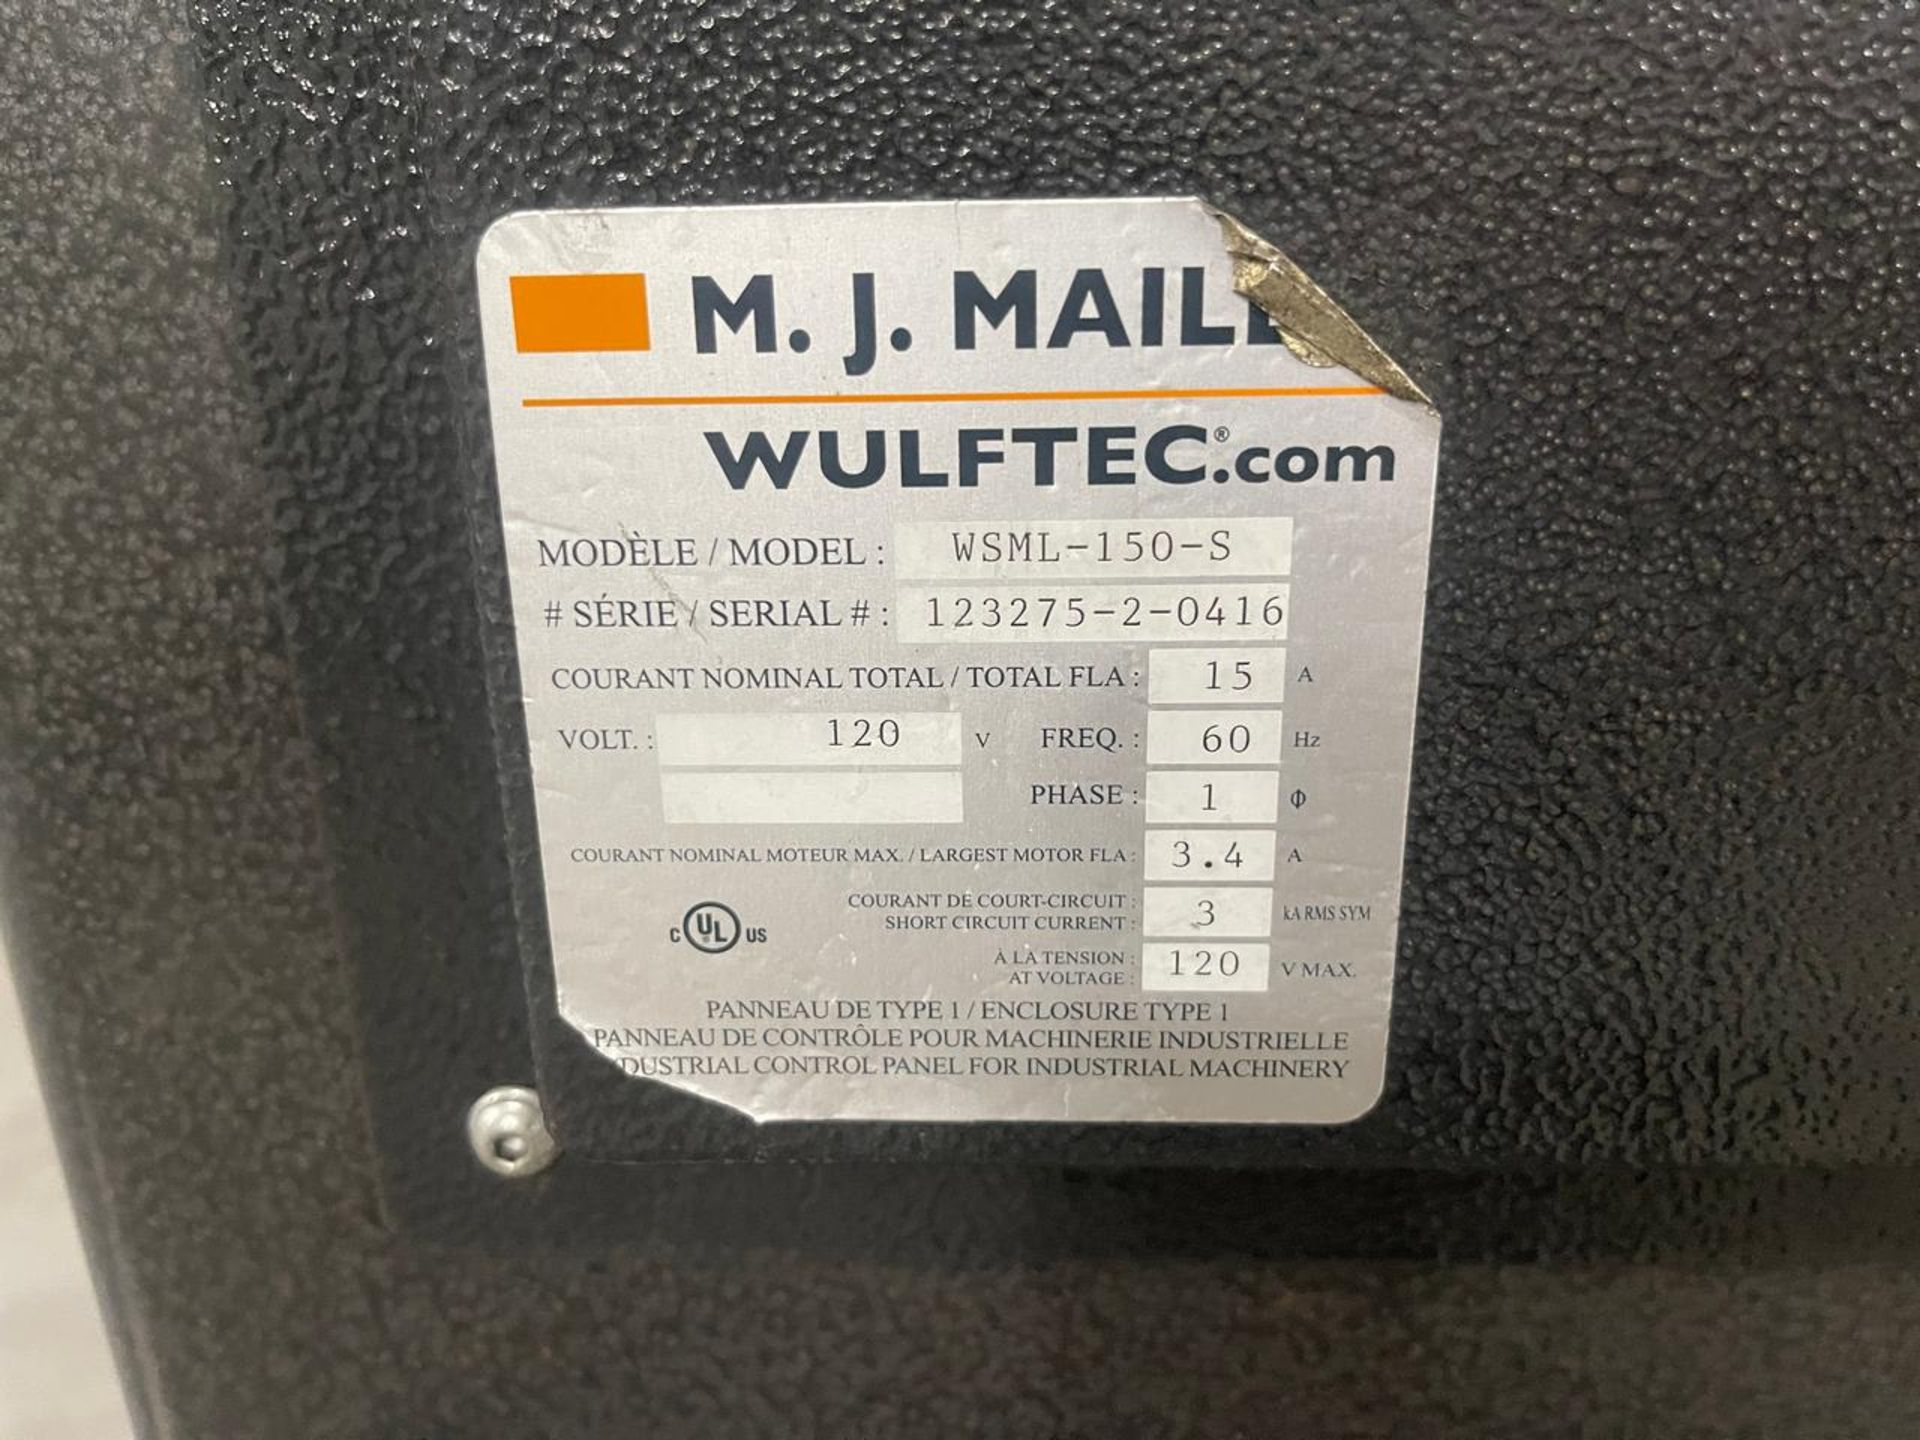 M.J. MAILLIS WULFTEC SML-150-S PALLET WRAPPER - Image 3 of 6